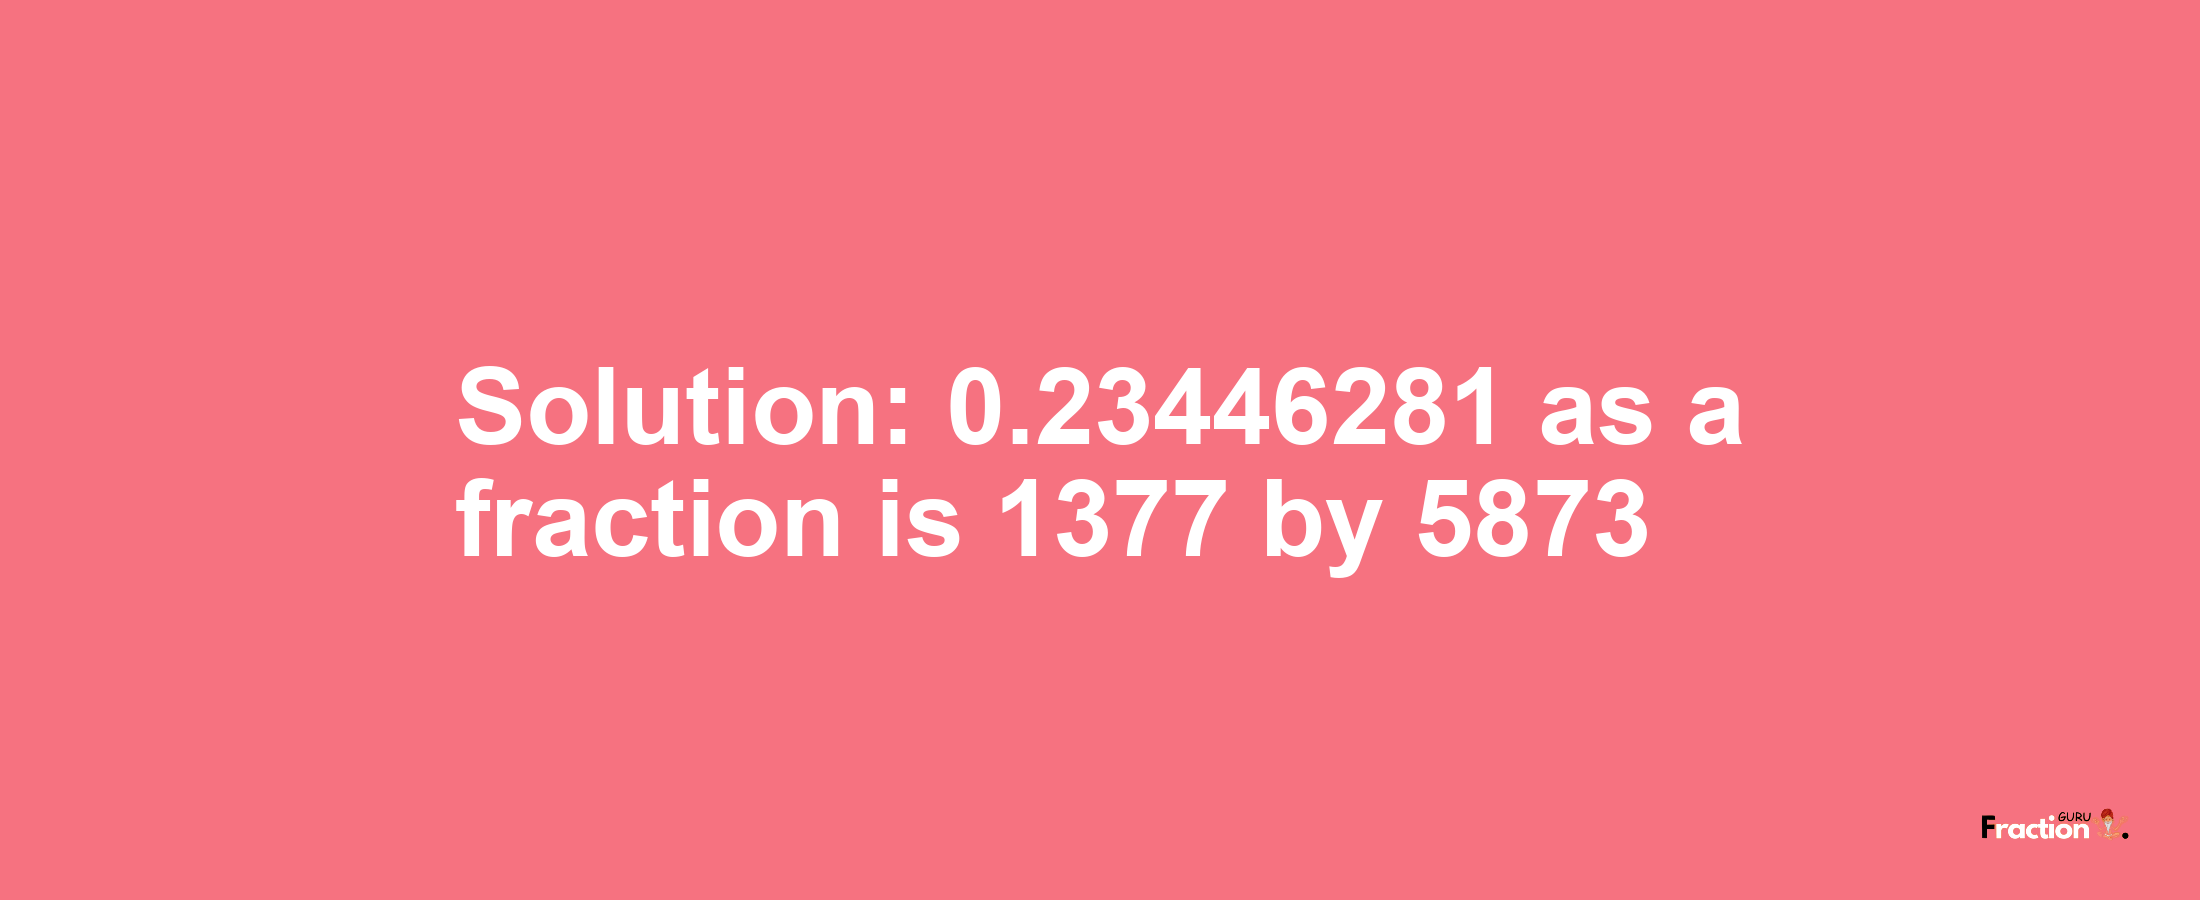 Solution:0.23446281 as a fraction is 1377/5873